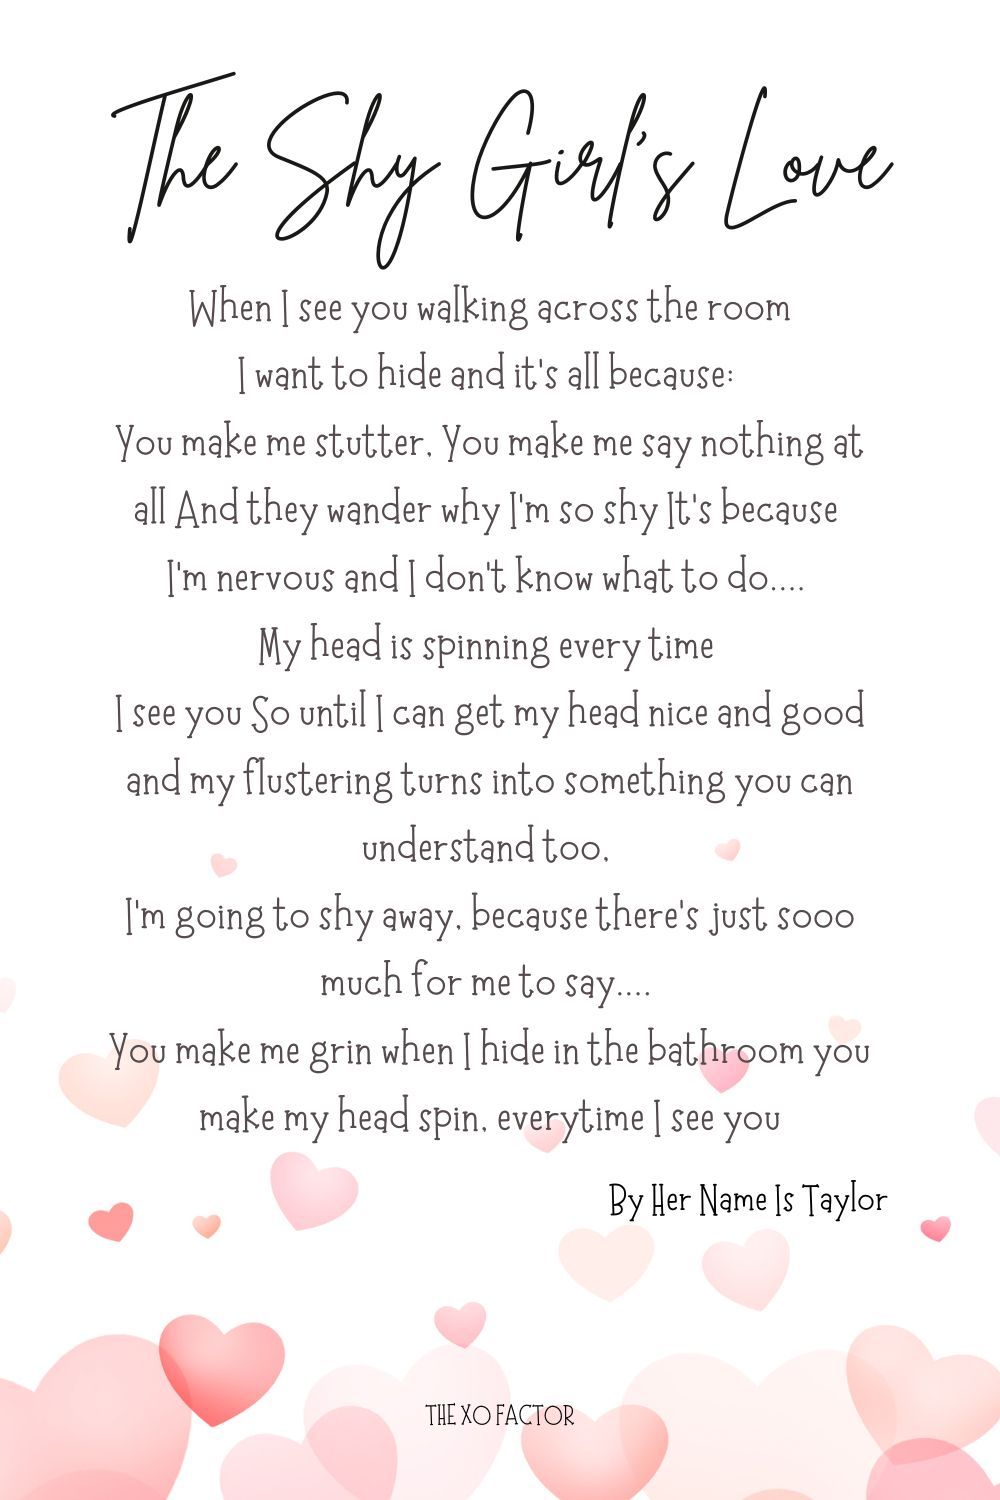 The Shy Girl's Love Poem by Her Name Is Taylor